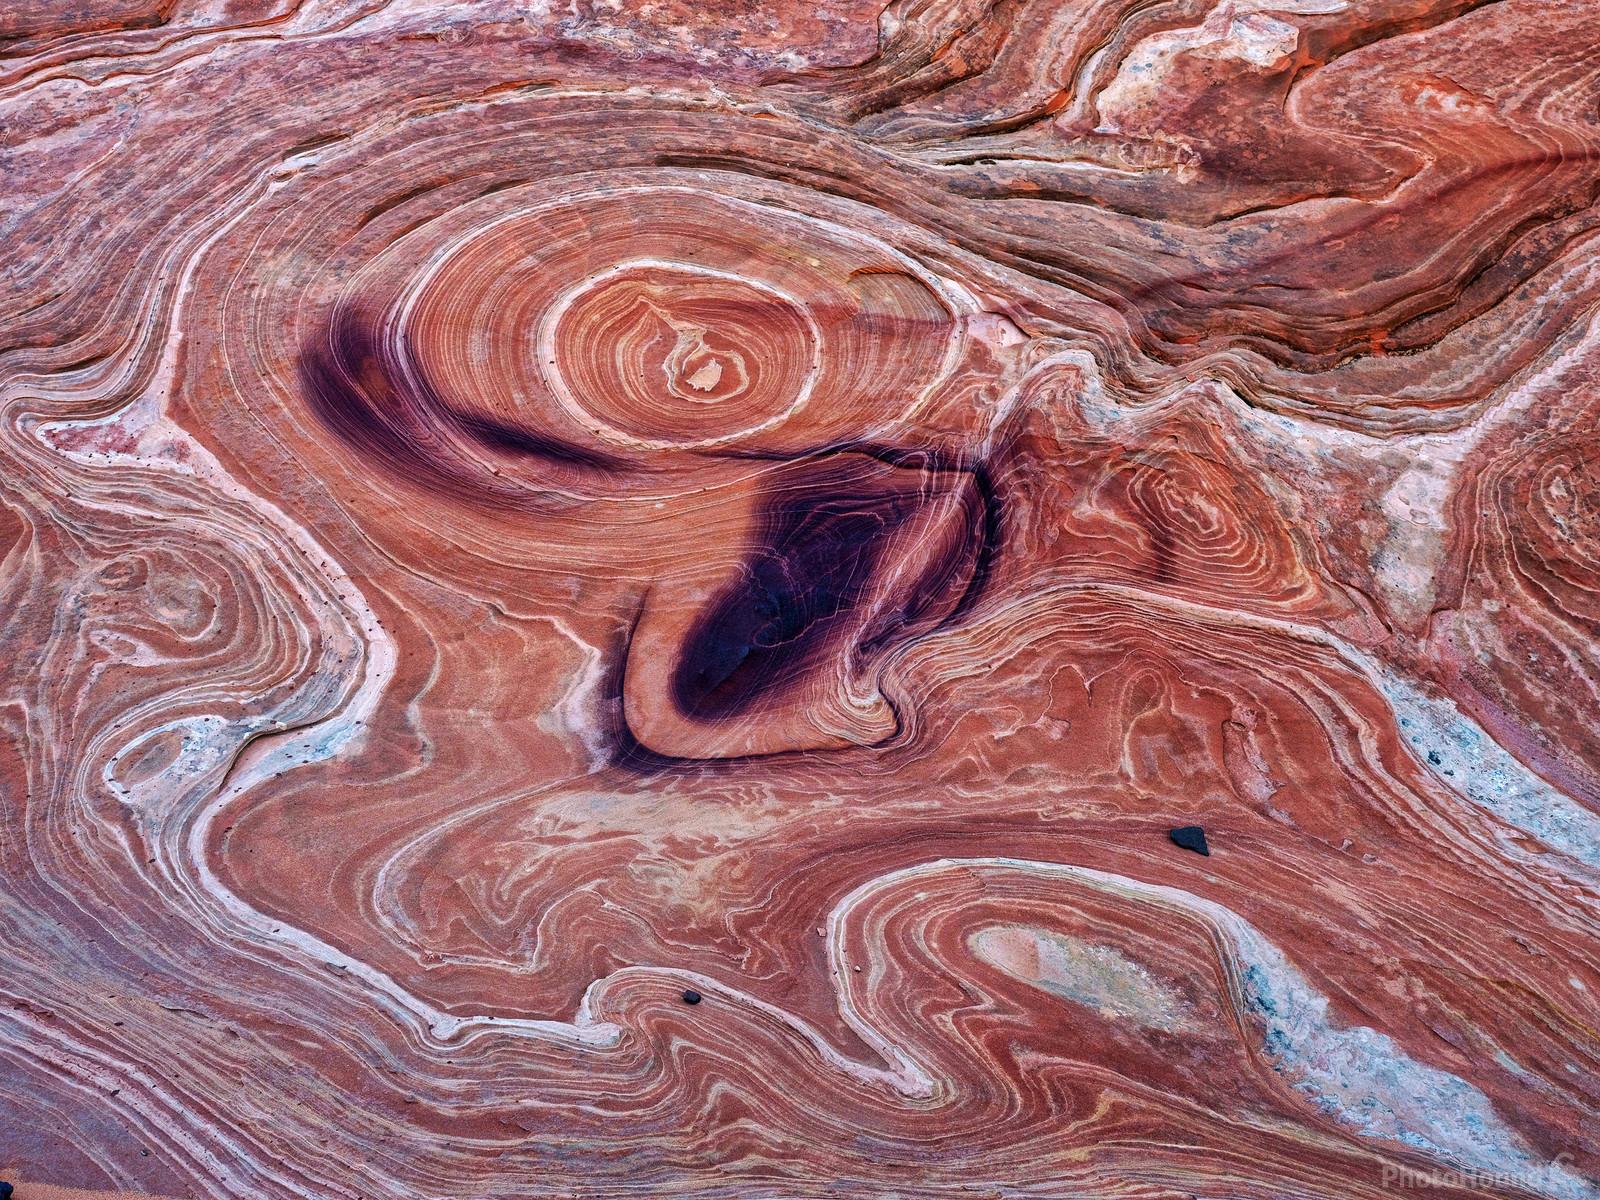 Image of Coyote Buttes North - The Boneyard by Laurent Martres